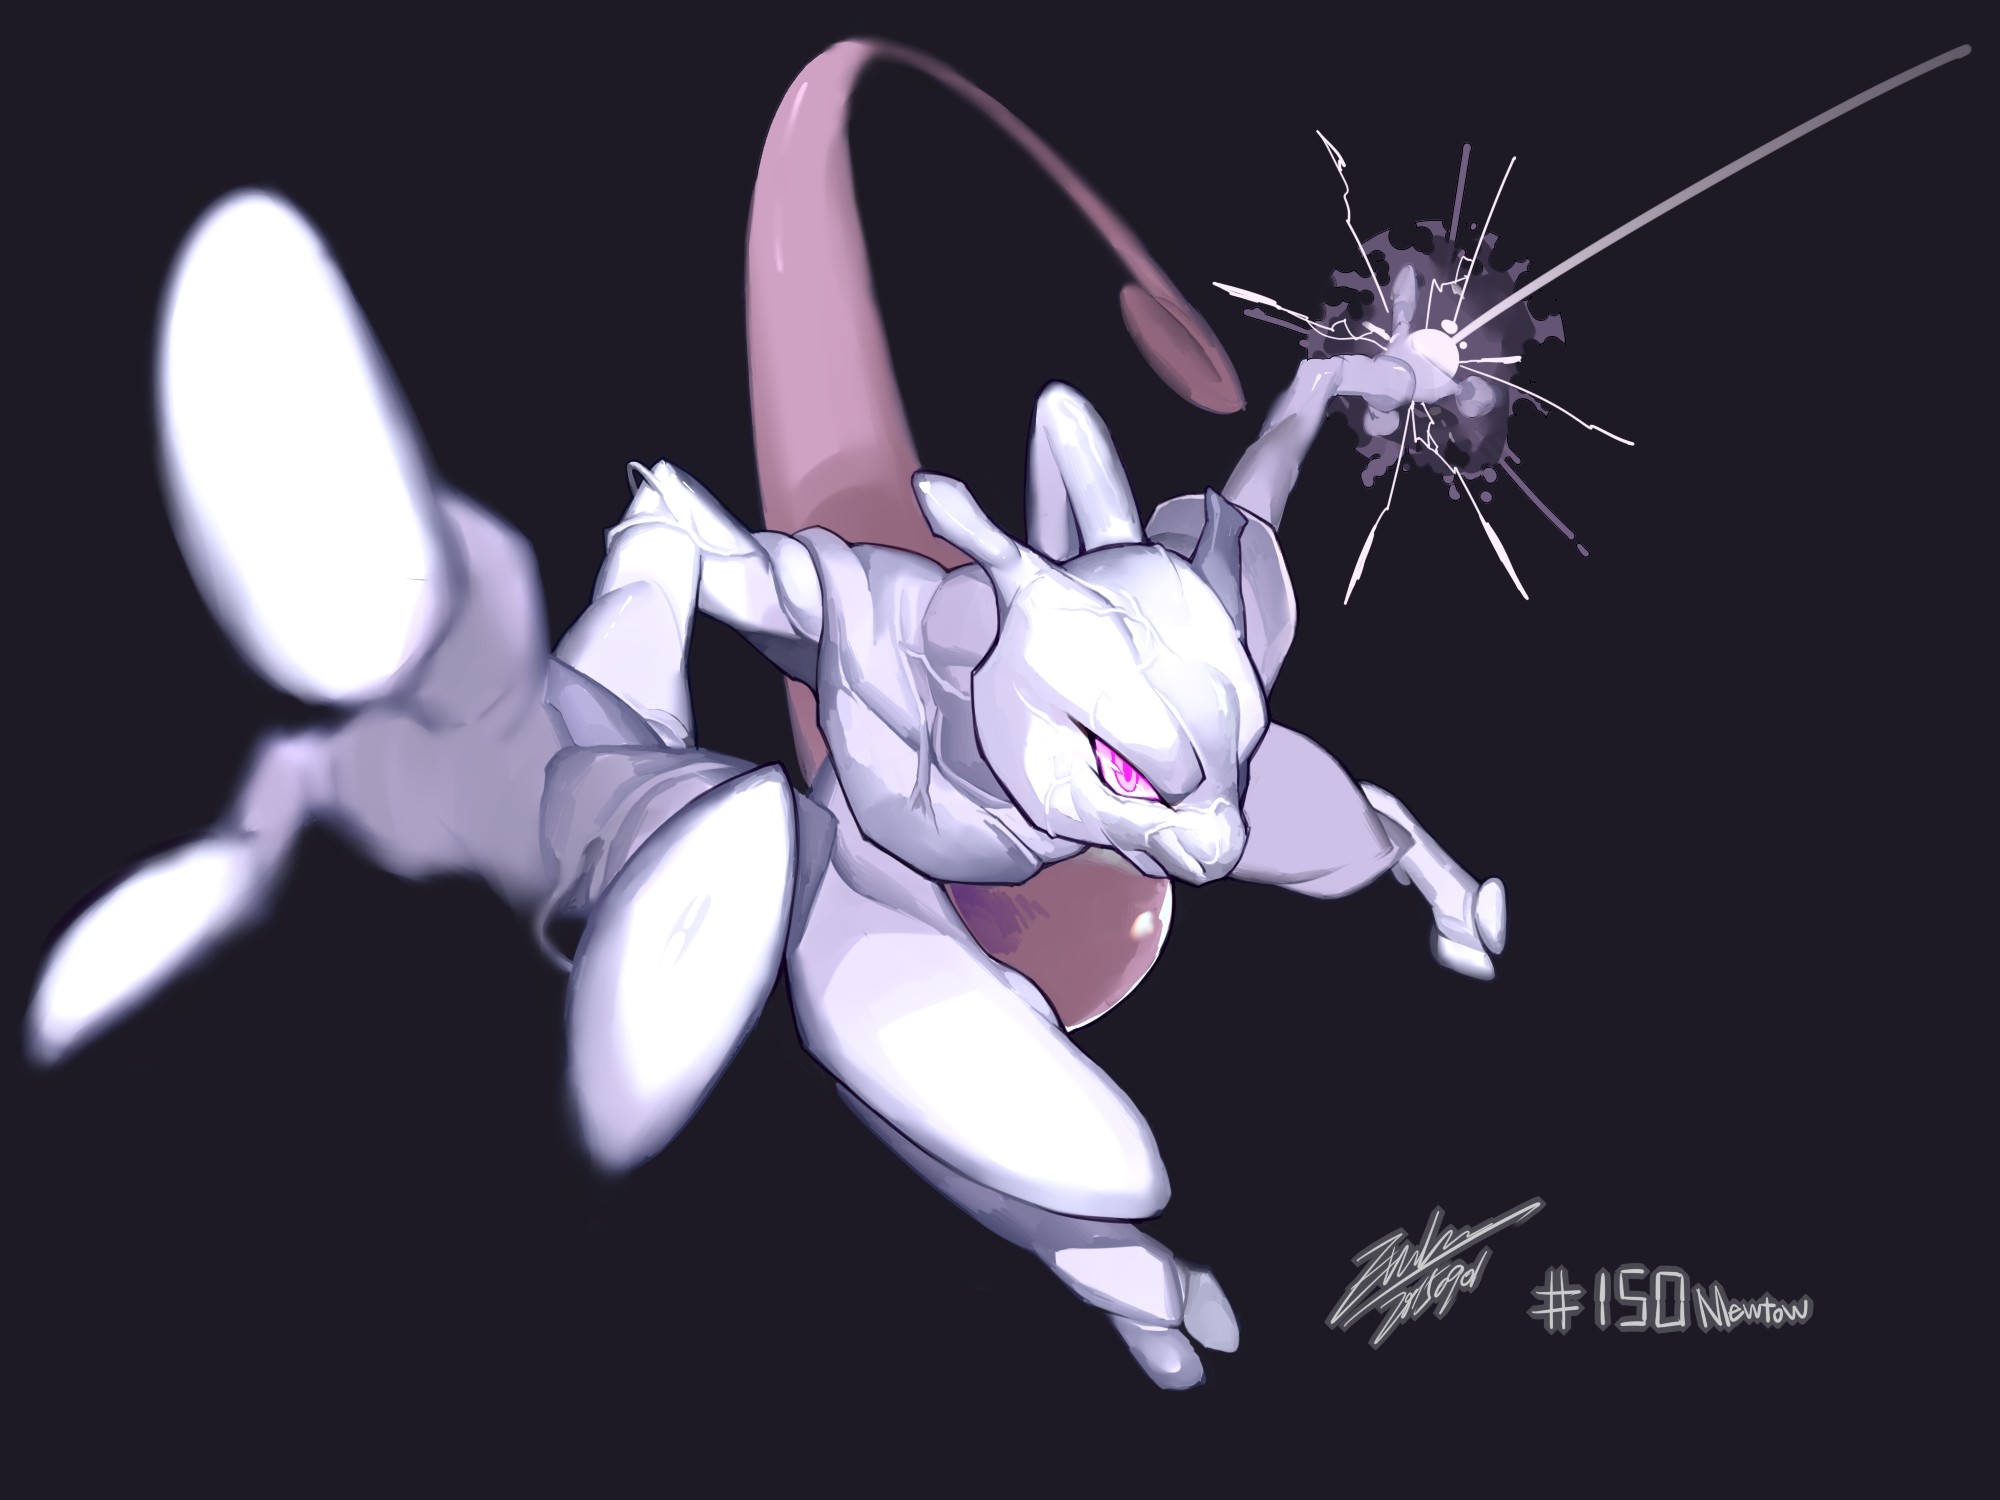 Mewtwo download Mewtwo image